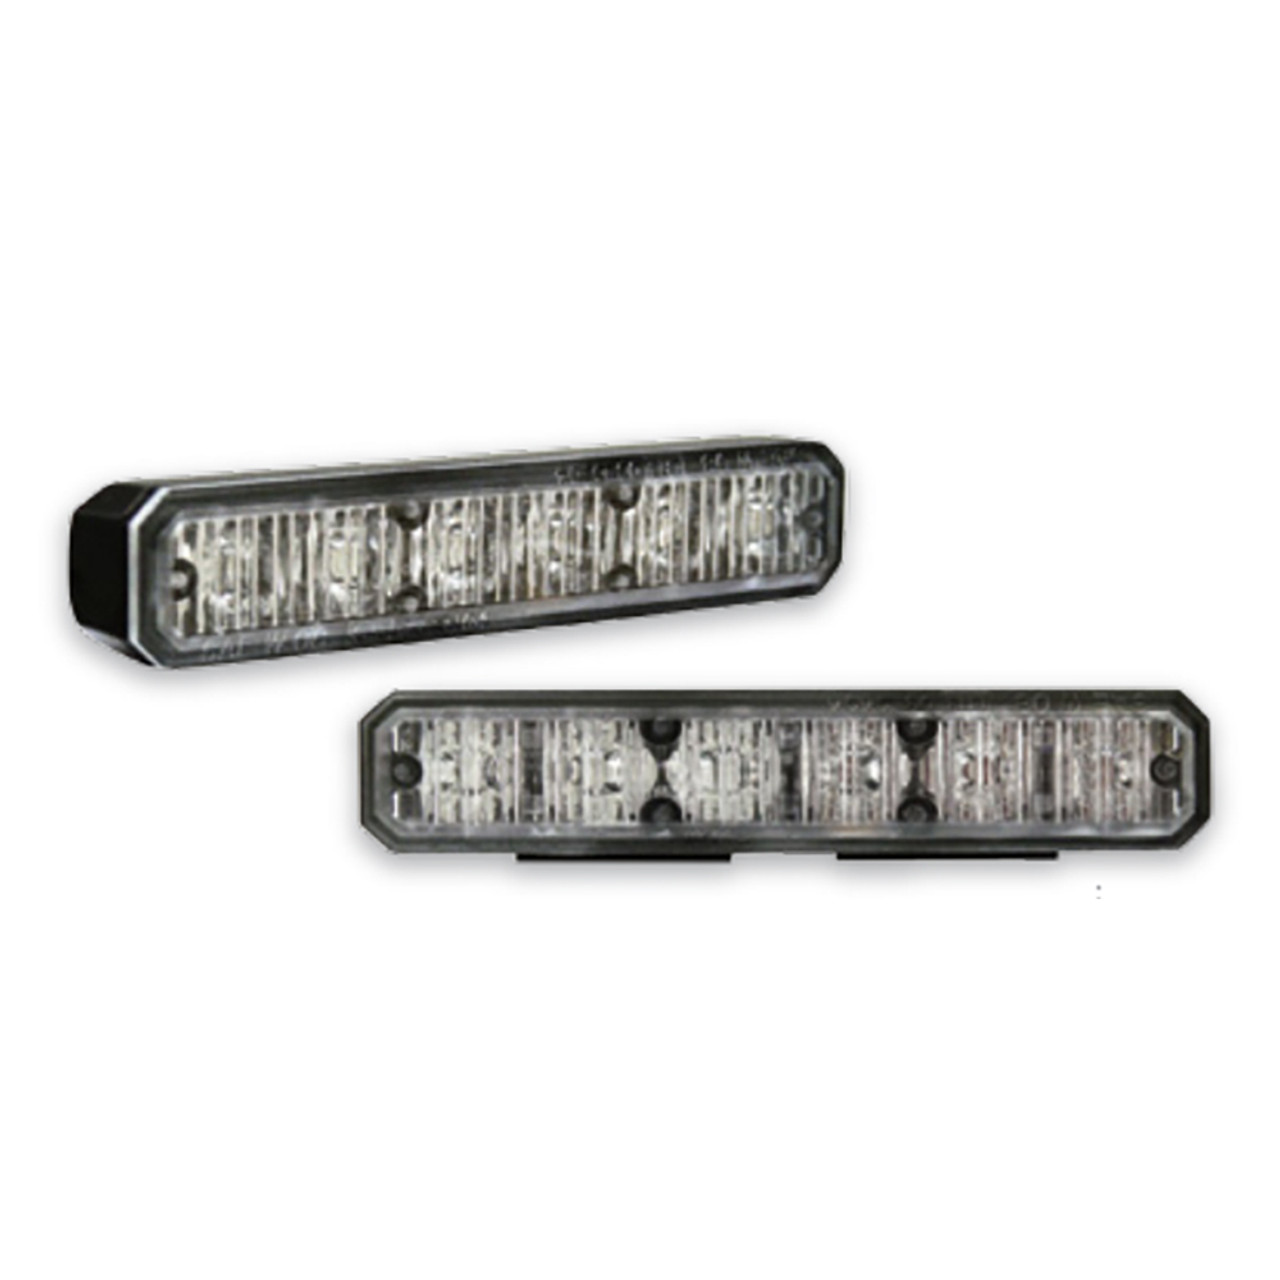 CLOSE OUT - Brooking Industries - MS6BHD - 12 LED Dual Color Lighthead